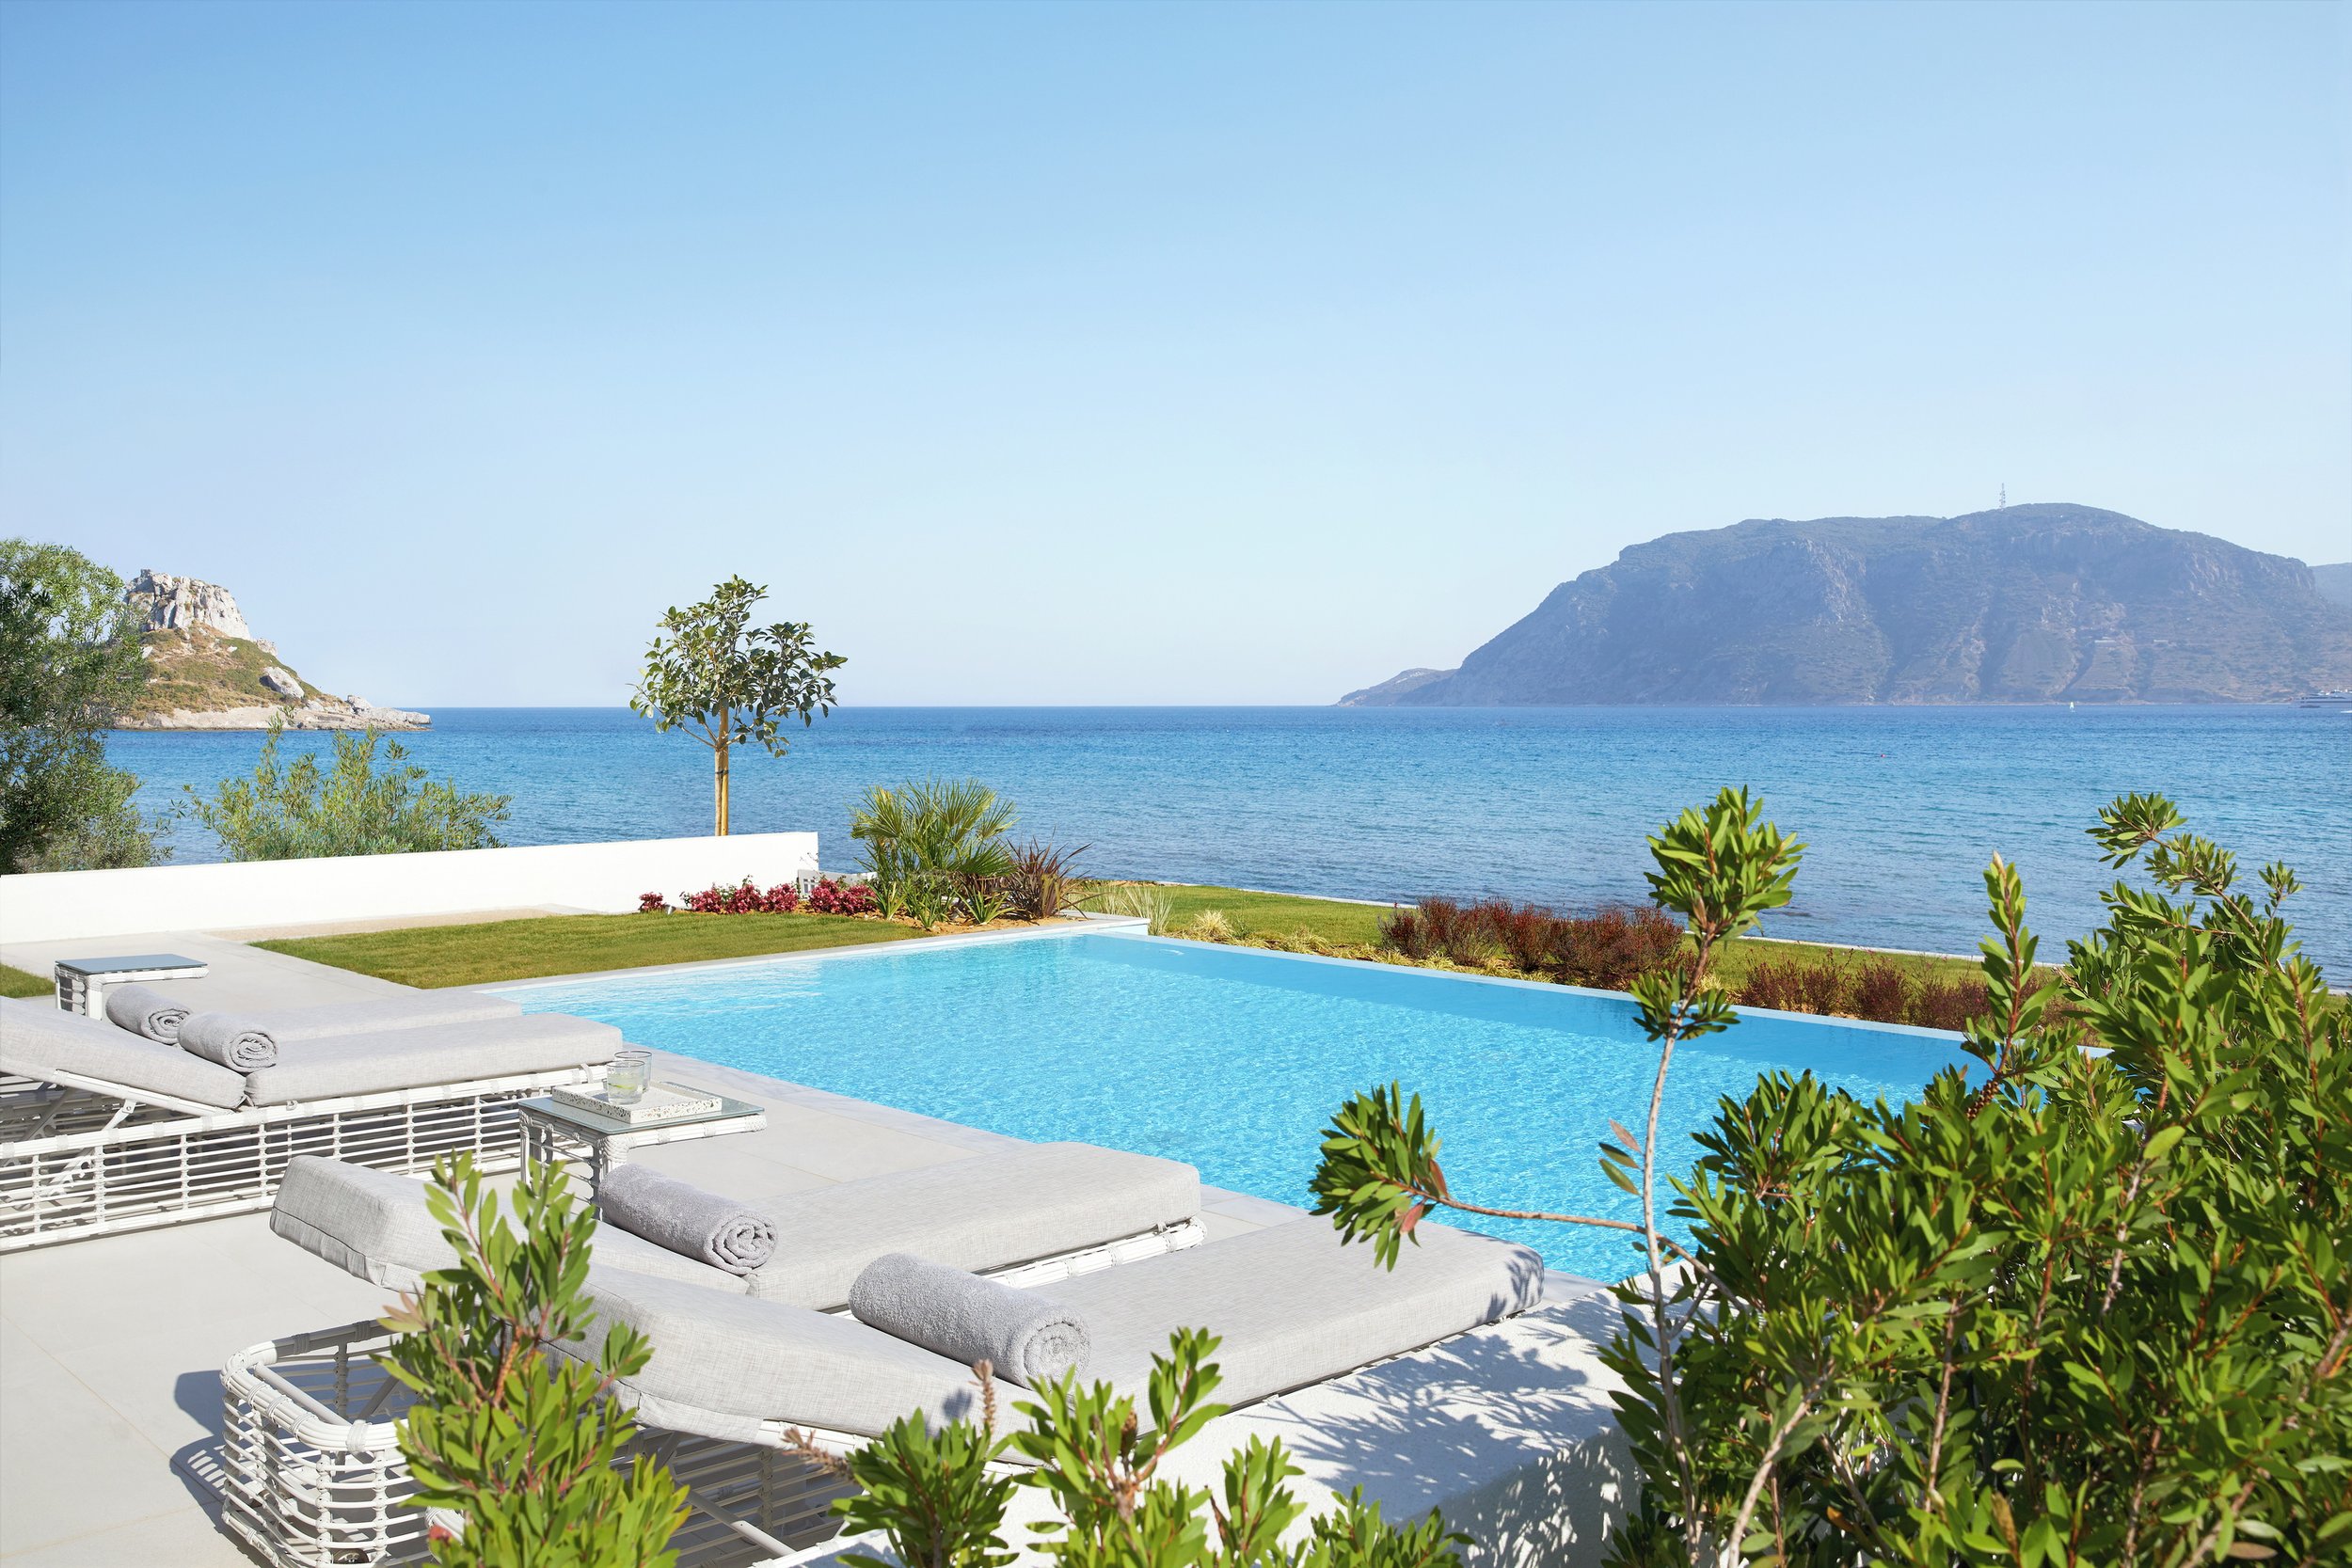 1043_Ikos Aria _ Deluxe Two Bedroom Bungalow Suite with Private Pool_6720x4480_2880x1920.jpg